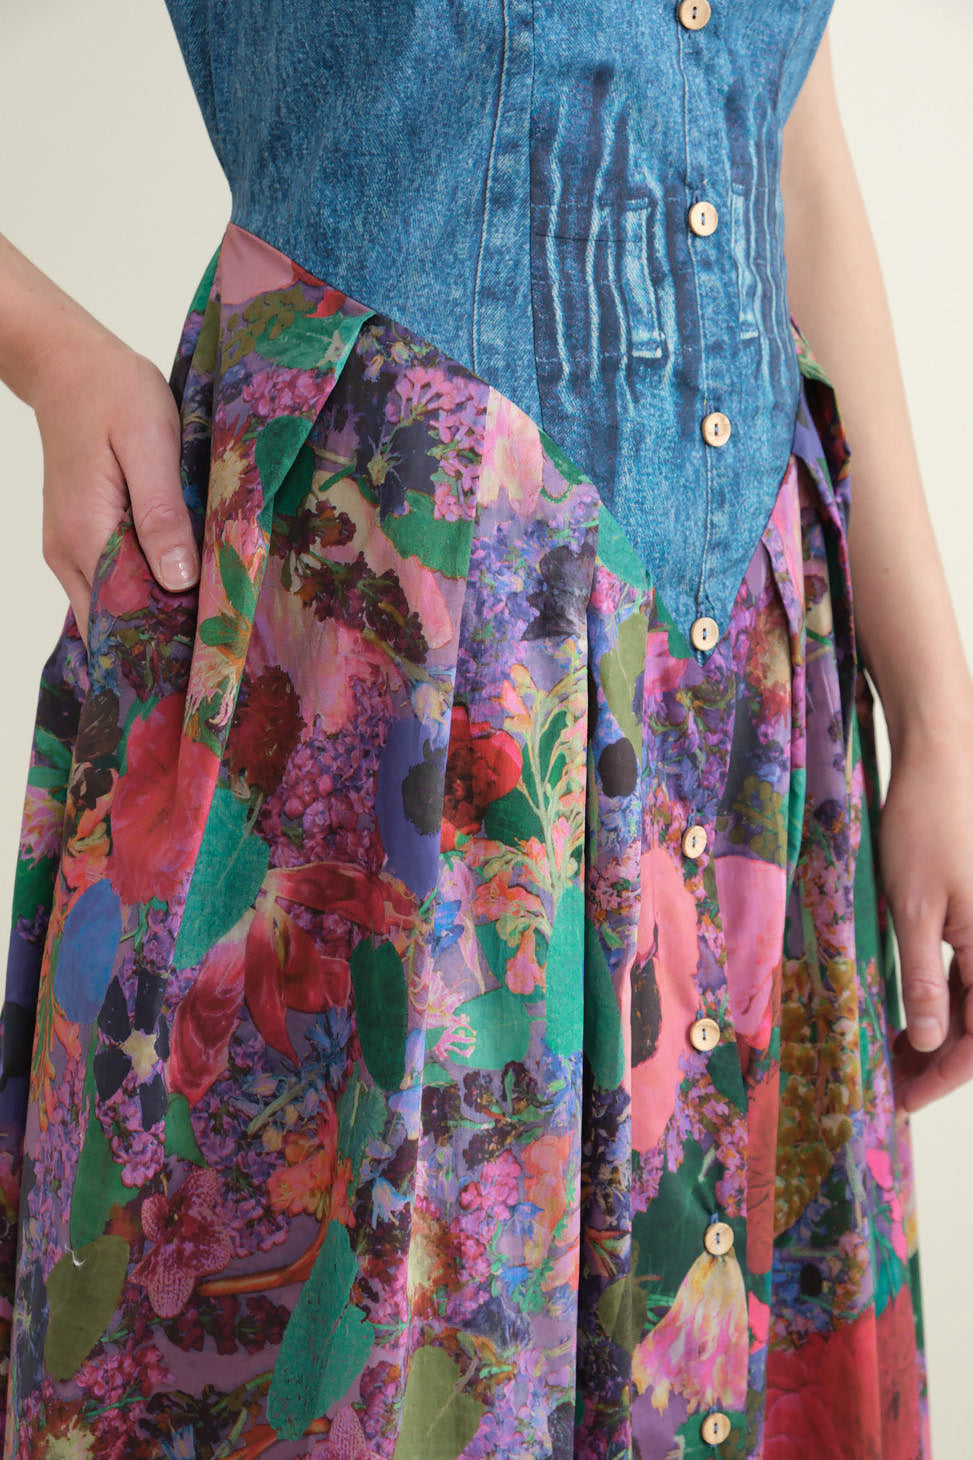 Pocket and skirt on Sleeveless Dress in Jeans and Flowers